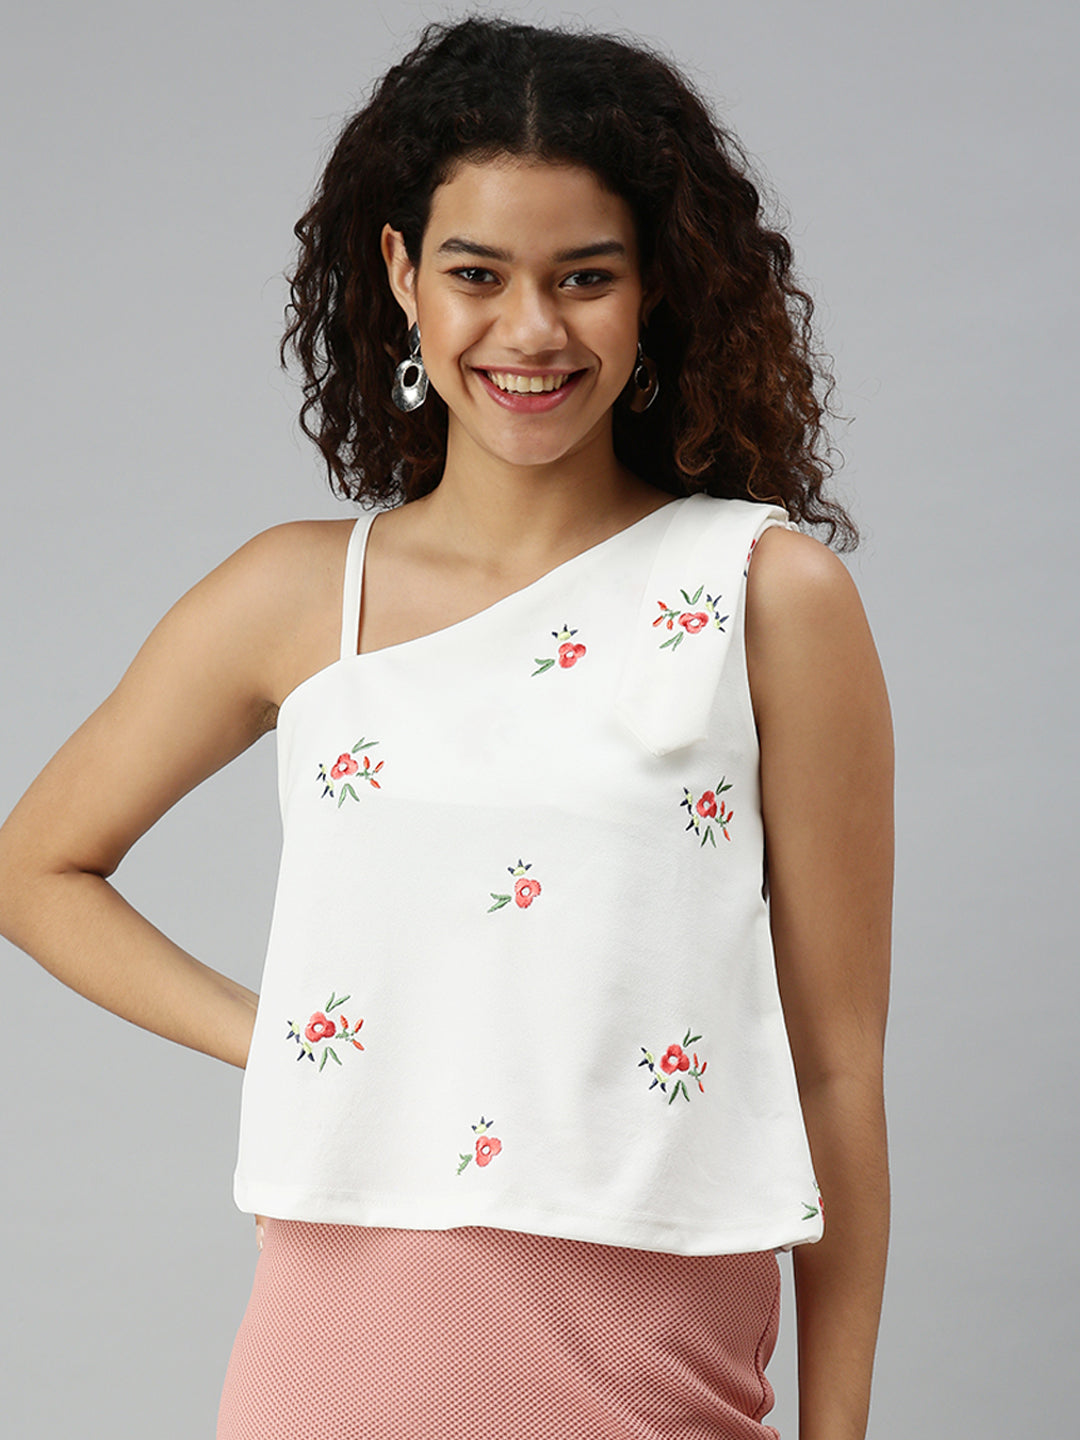 Women's Solid White Top